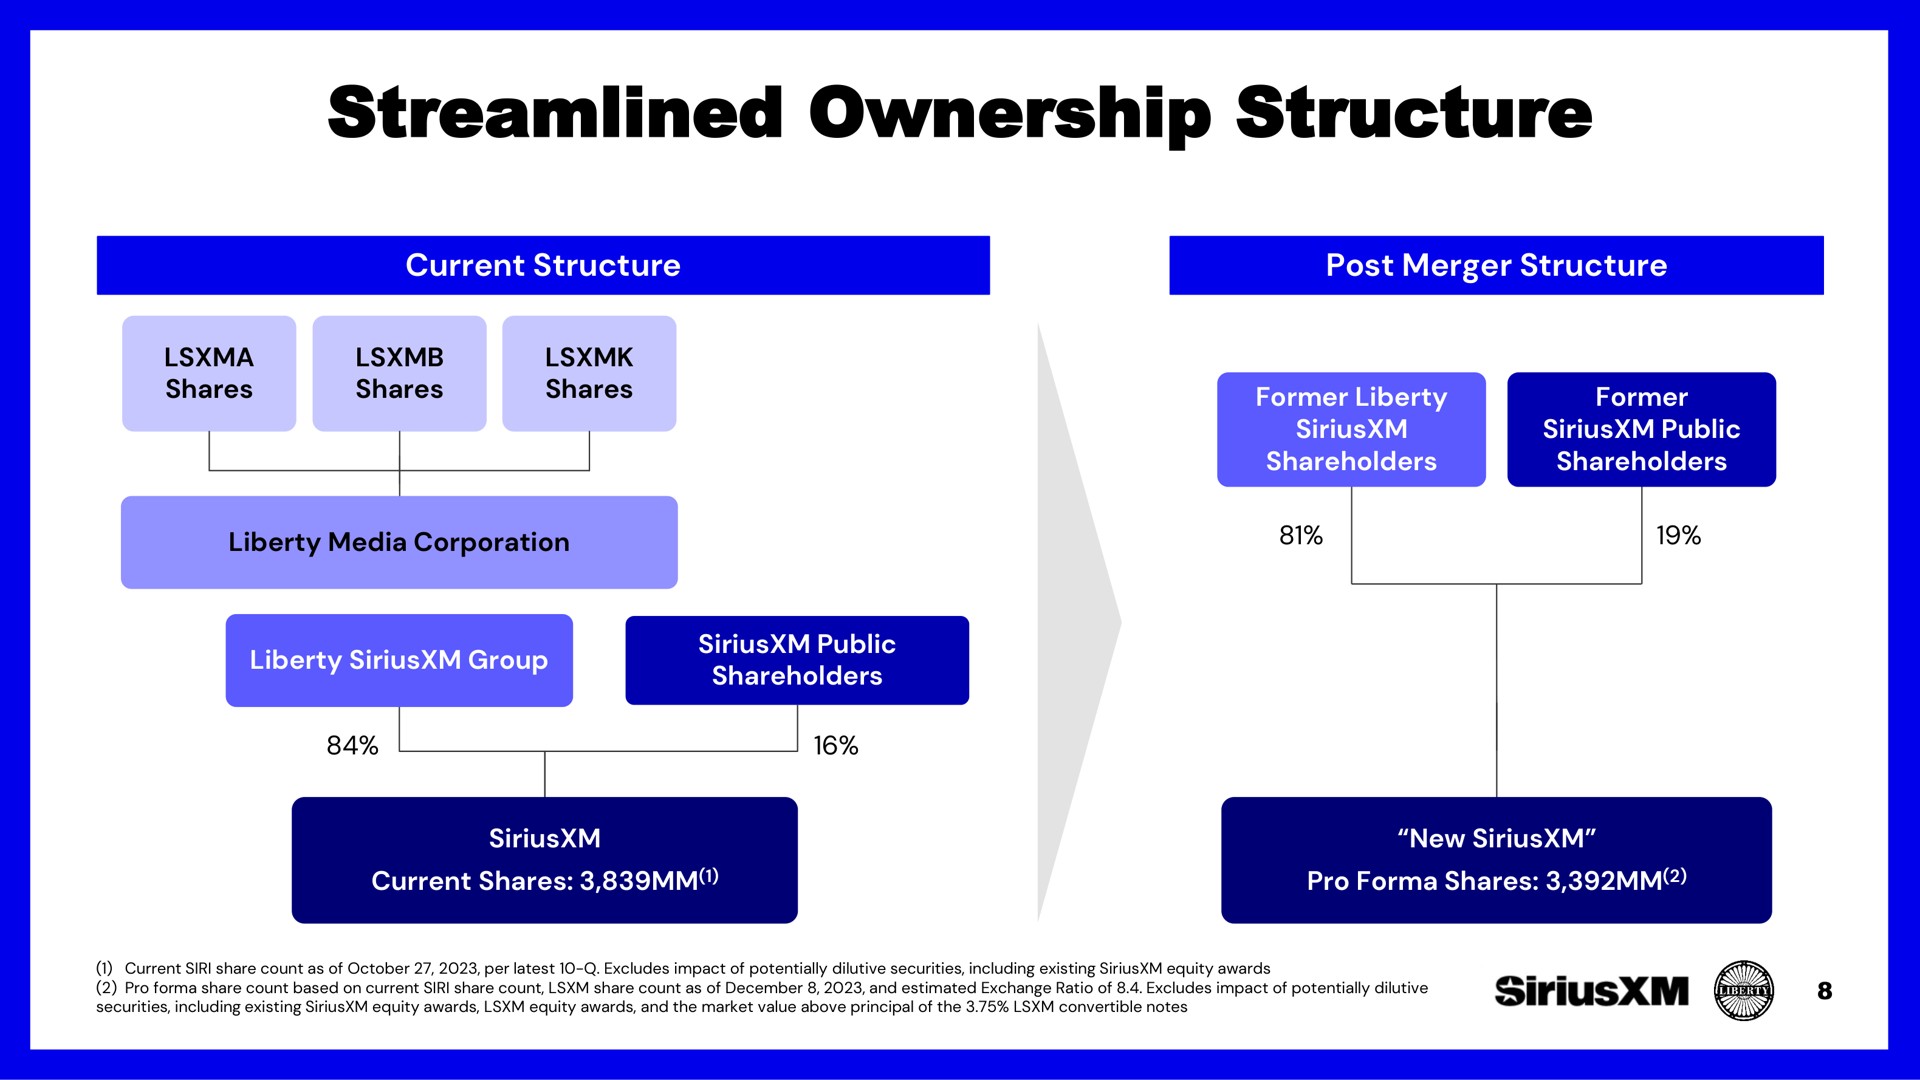 streamlined ownership structure | SiriusXM